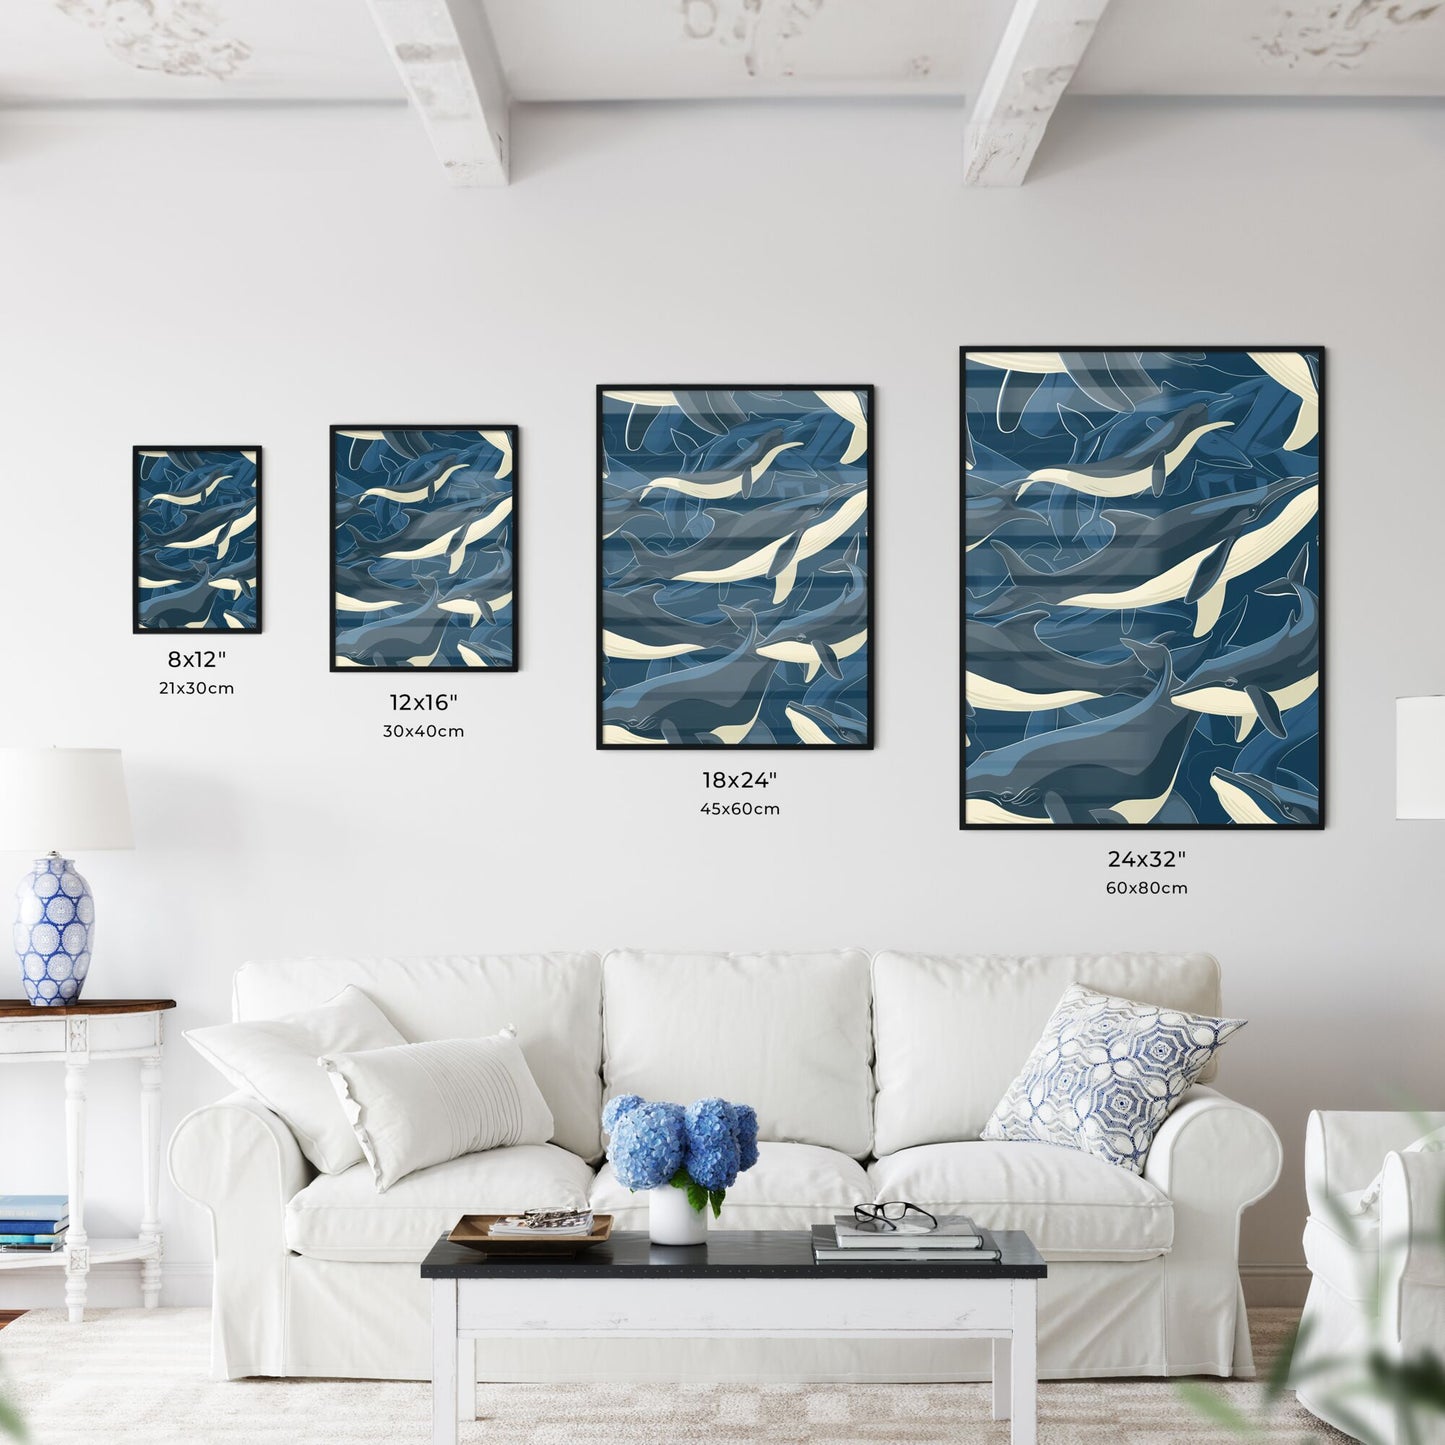 Smiling cute cartoon whales in different poses, swimming in a swirl - Art print of a group of whales in the water Default Title